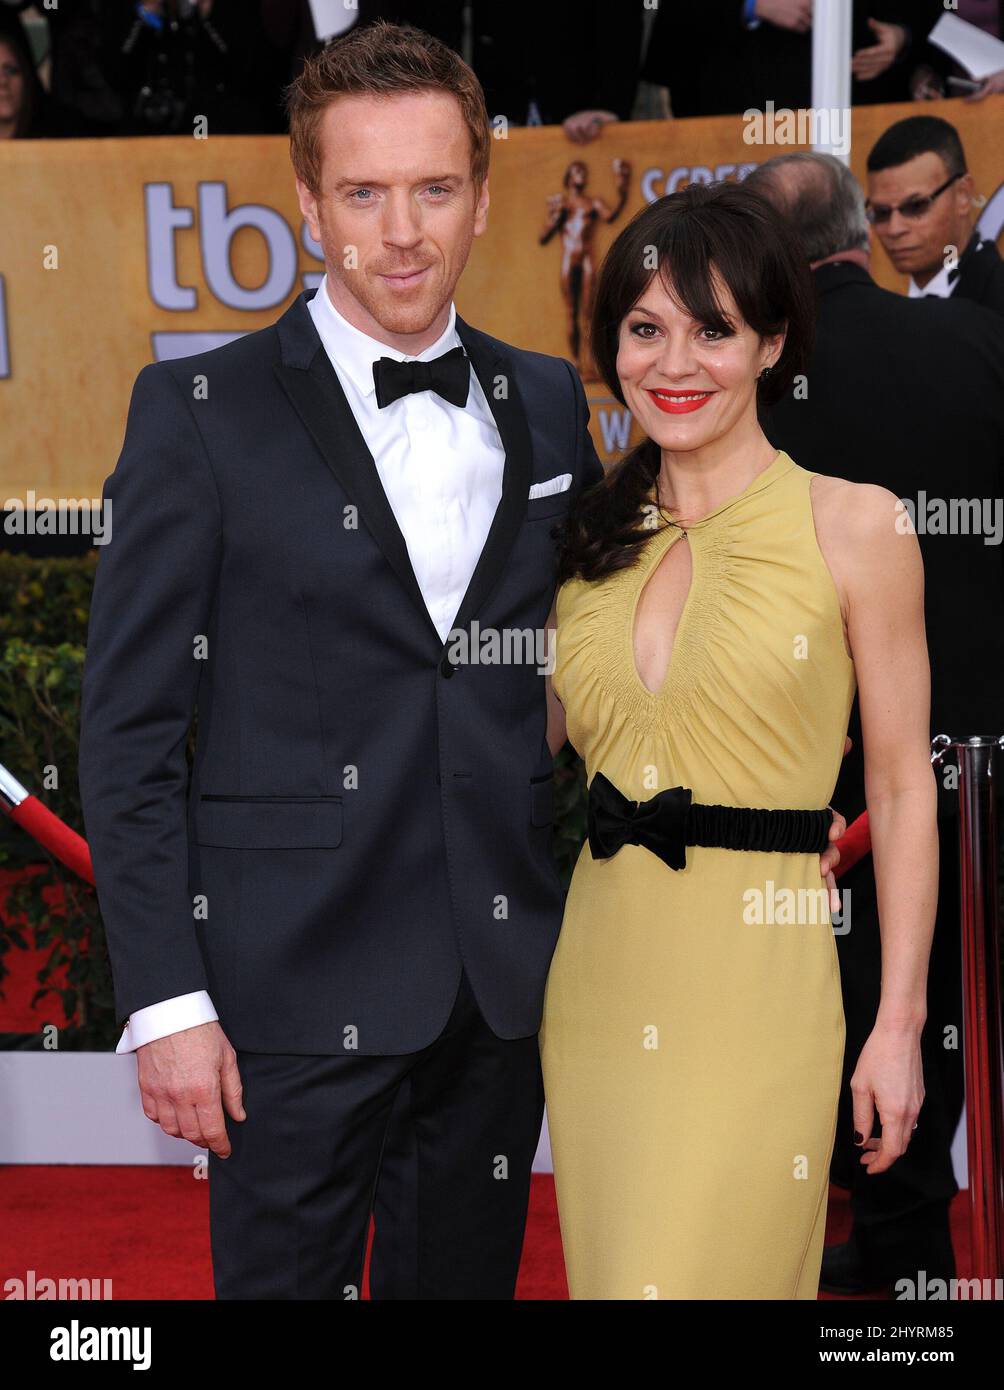 FILE PHOTO: Helen McCrory the English actress and wife of actor Damian Lewis has passed away at the age of 52 after a battle with cancer. January 27, 2013 Los Angeles, Ca. Damian Lewis & Helen McCrory 19th Annual SAG Awards - Arrivals at Shrine Auditorium Stock Photo